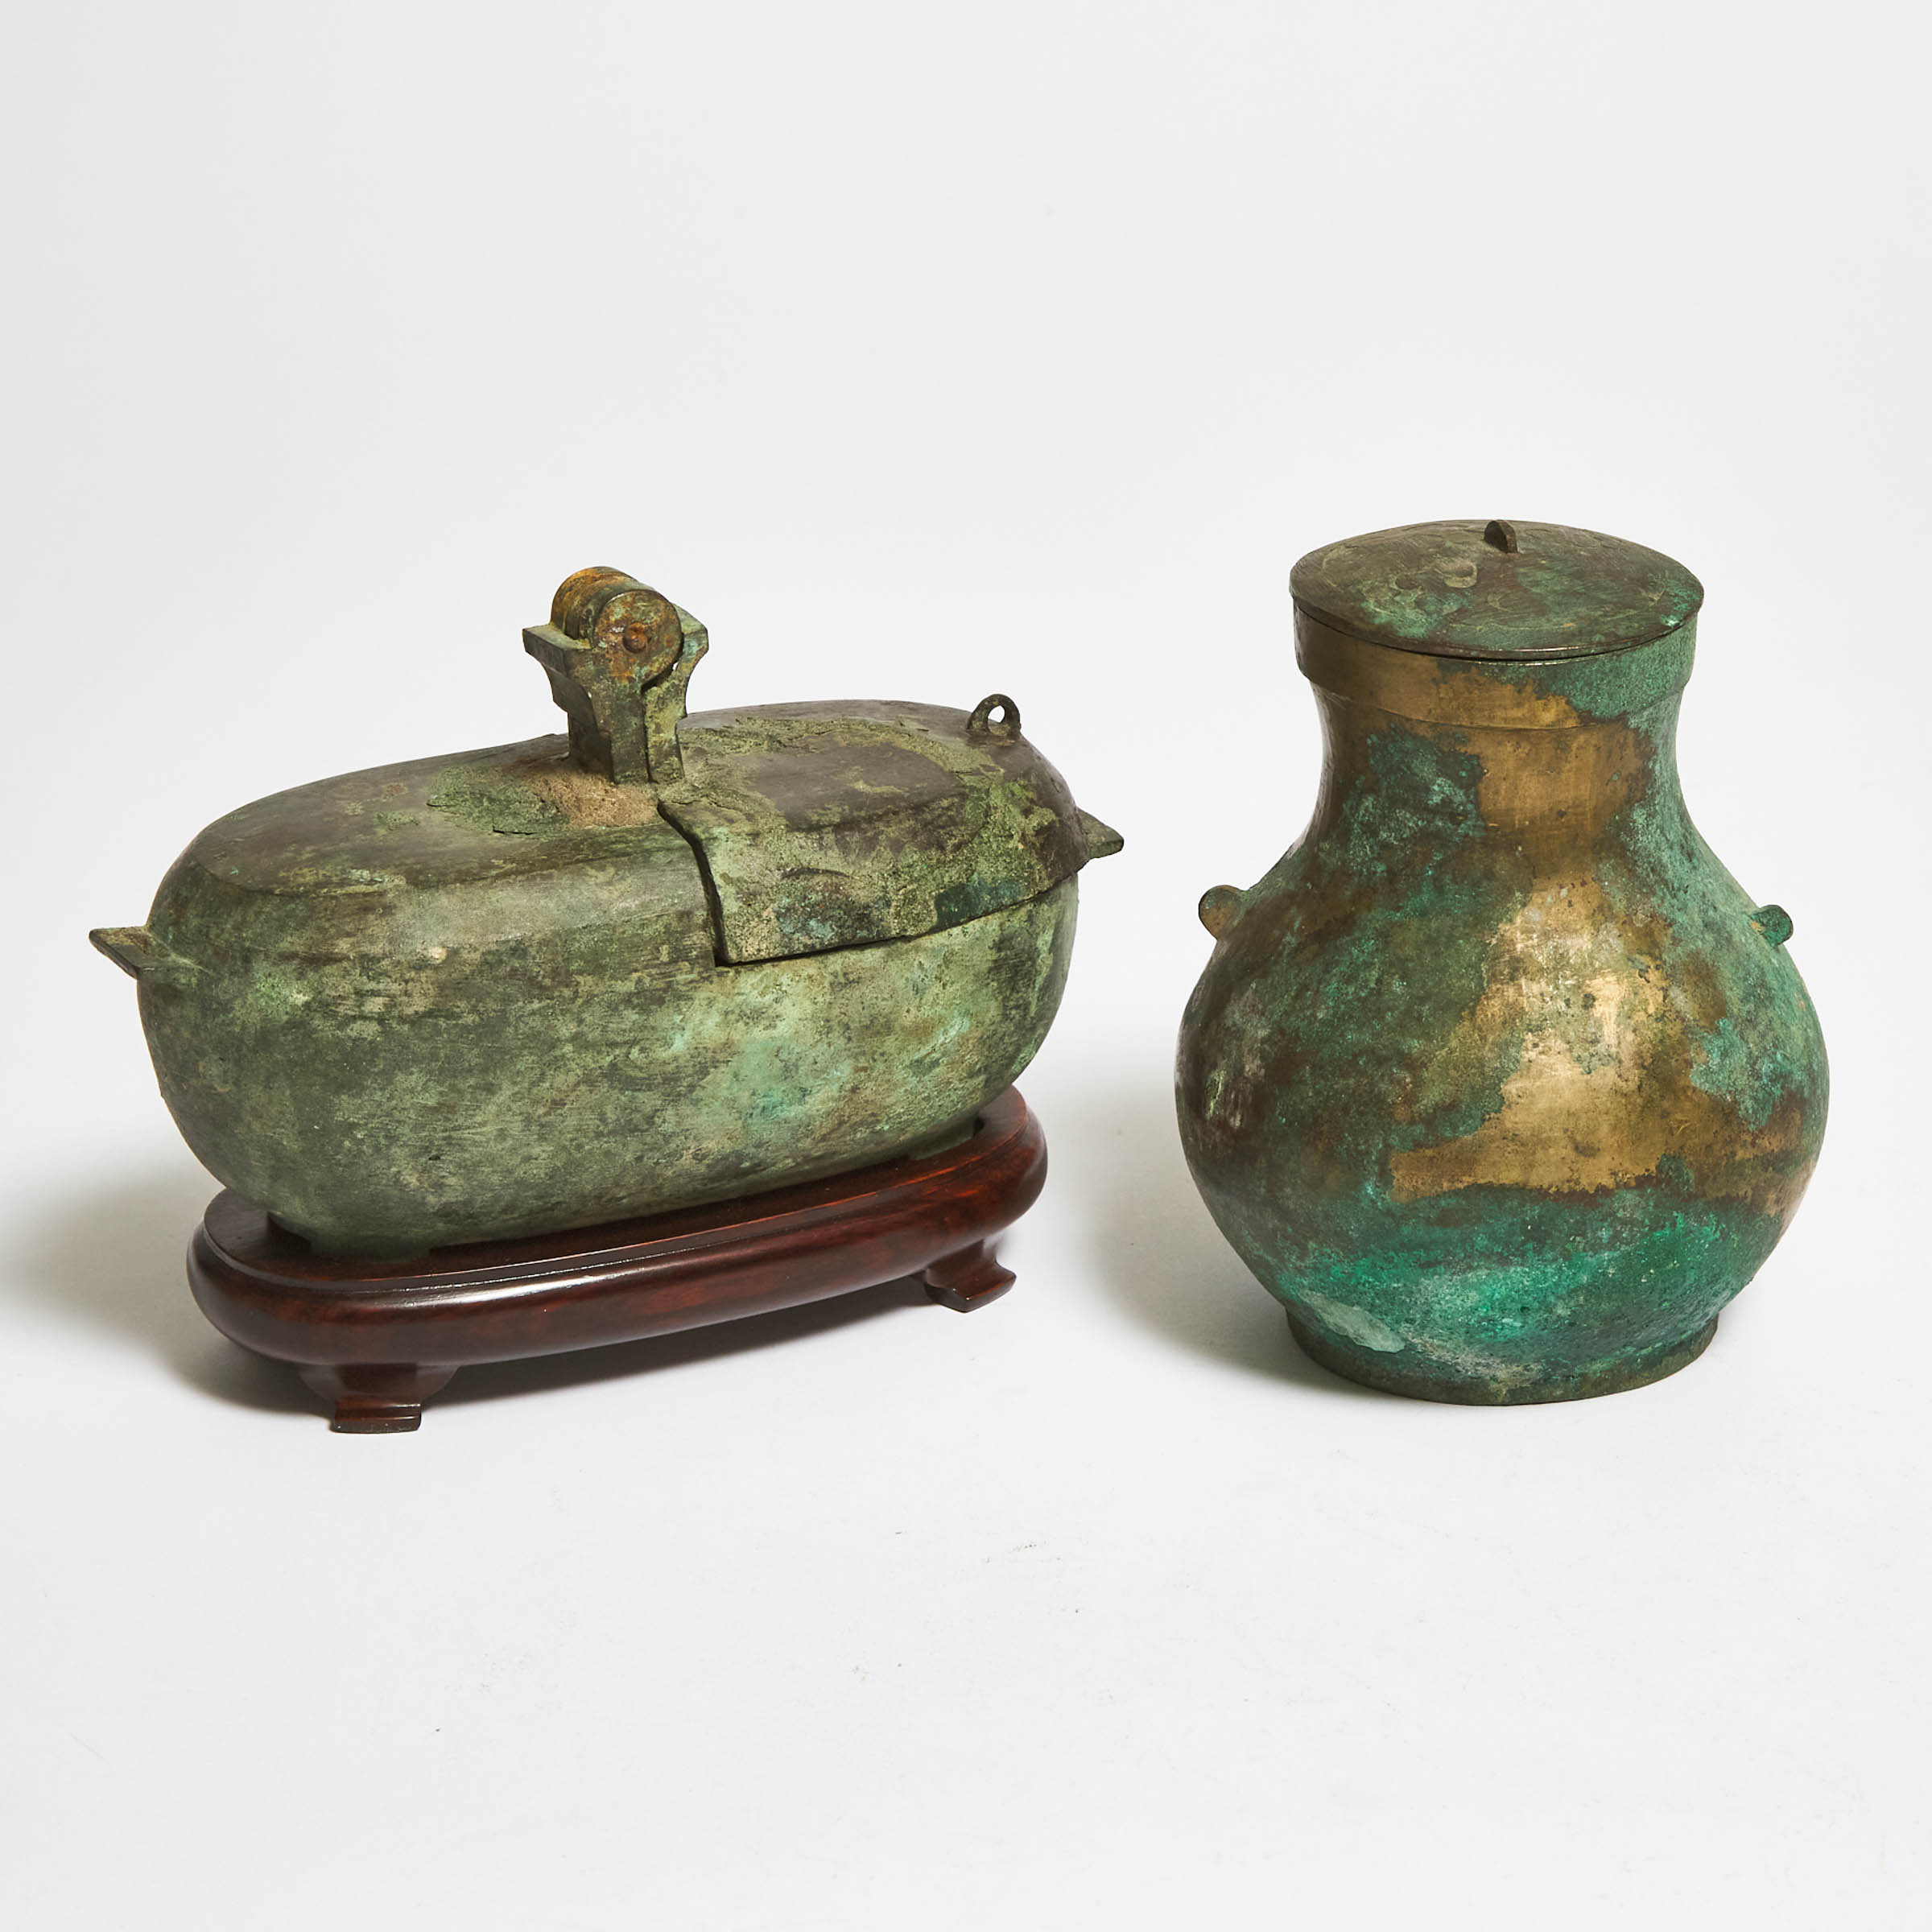 A Bronze Oil Lamp, Together With a Lidded Vase, Han Dynasty (206 BC-AD 220)